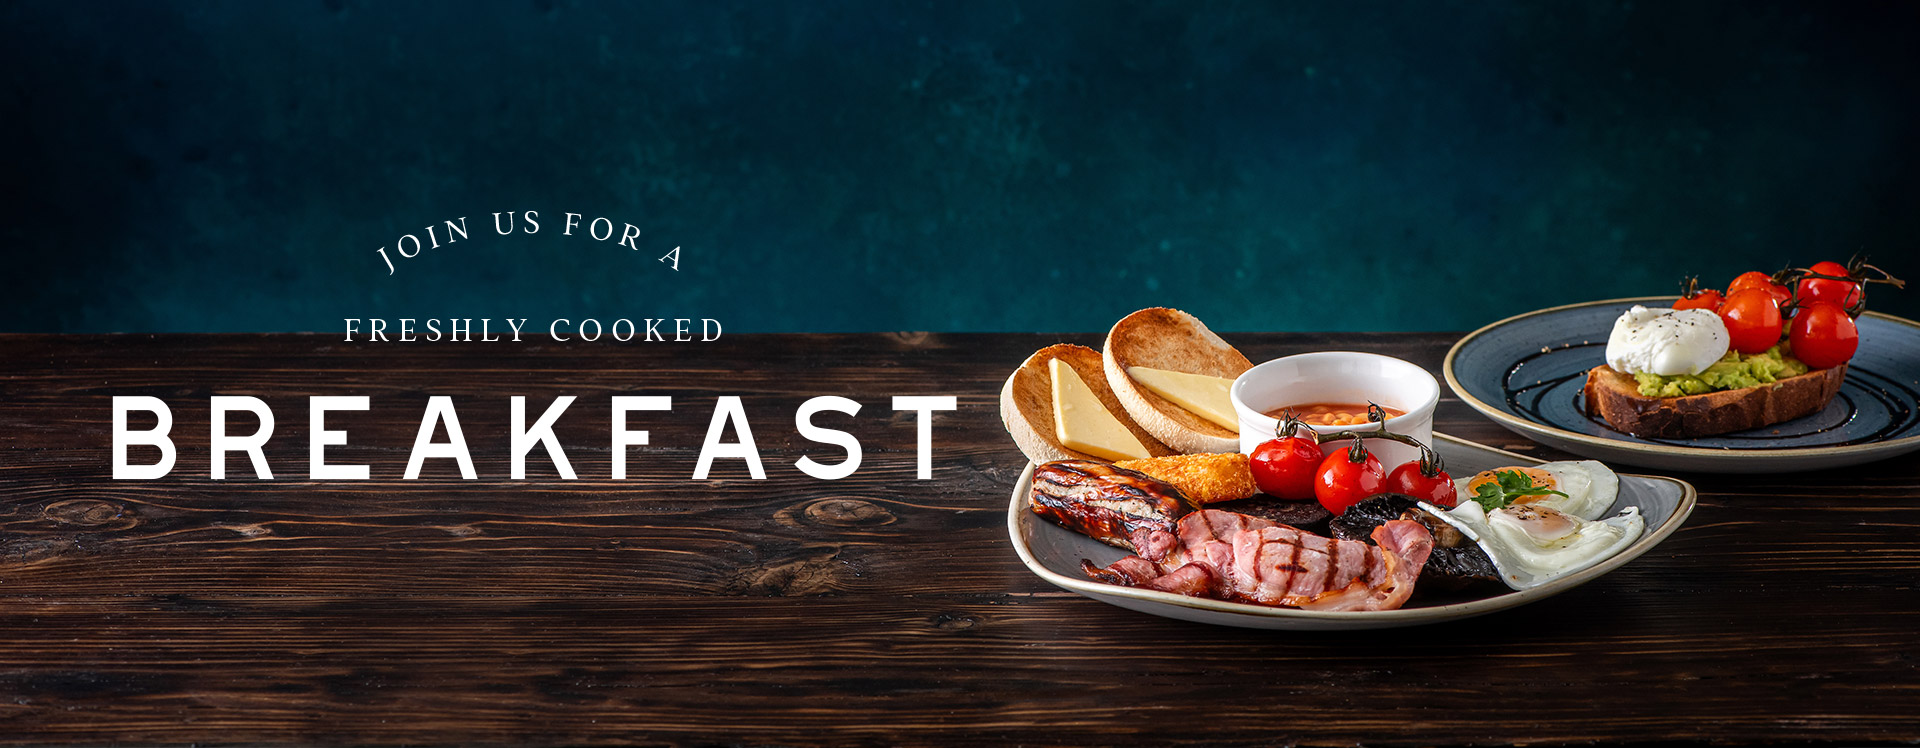 Breakfast at The St George's Tavern - Book a table